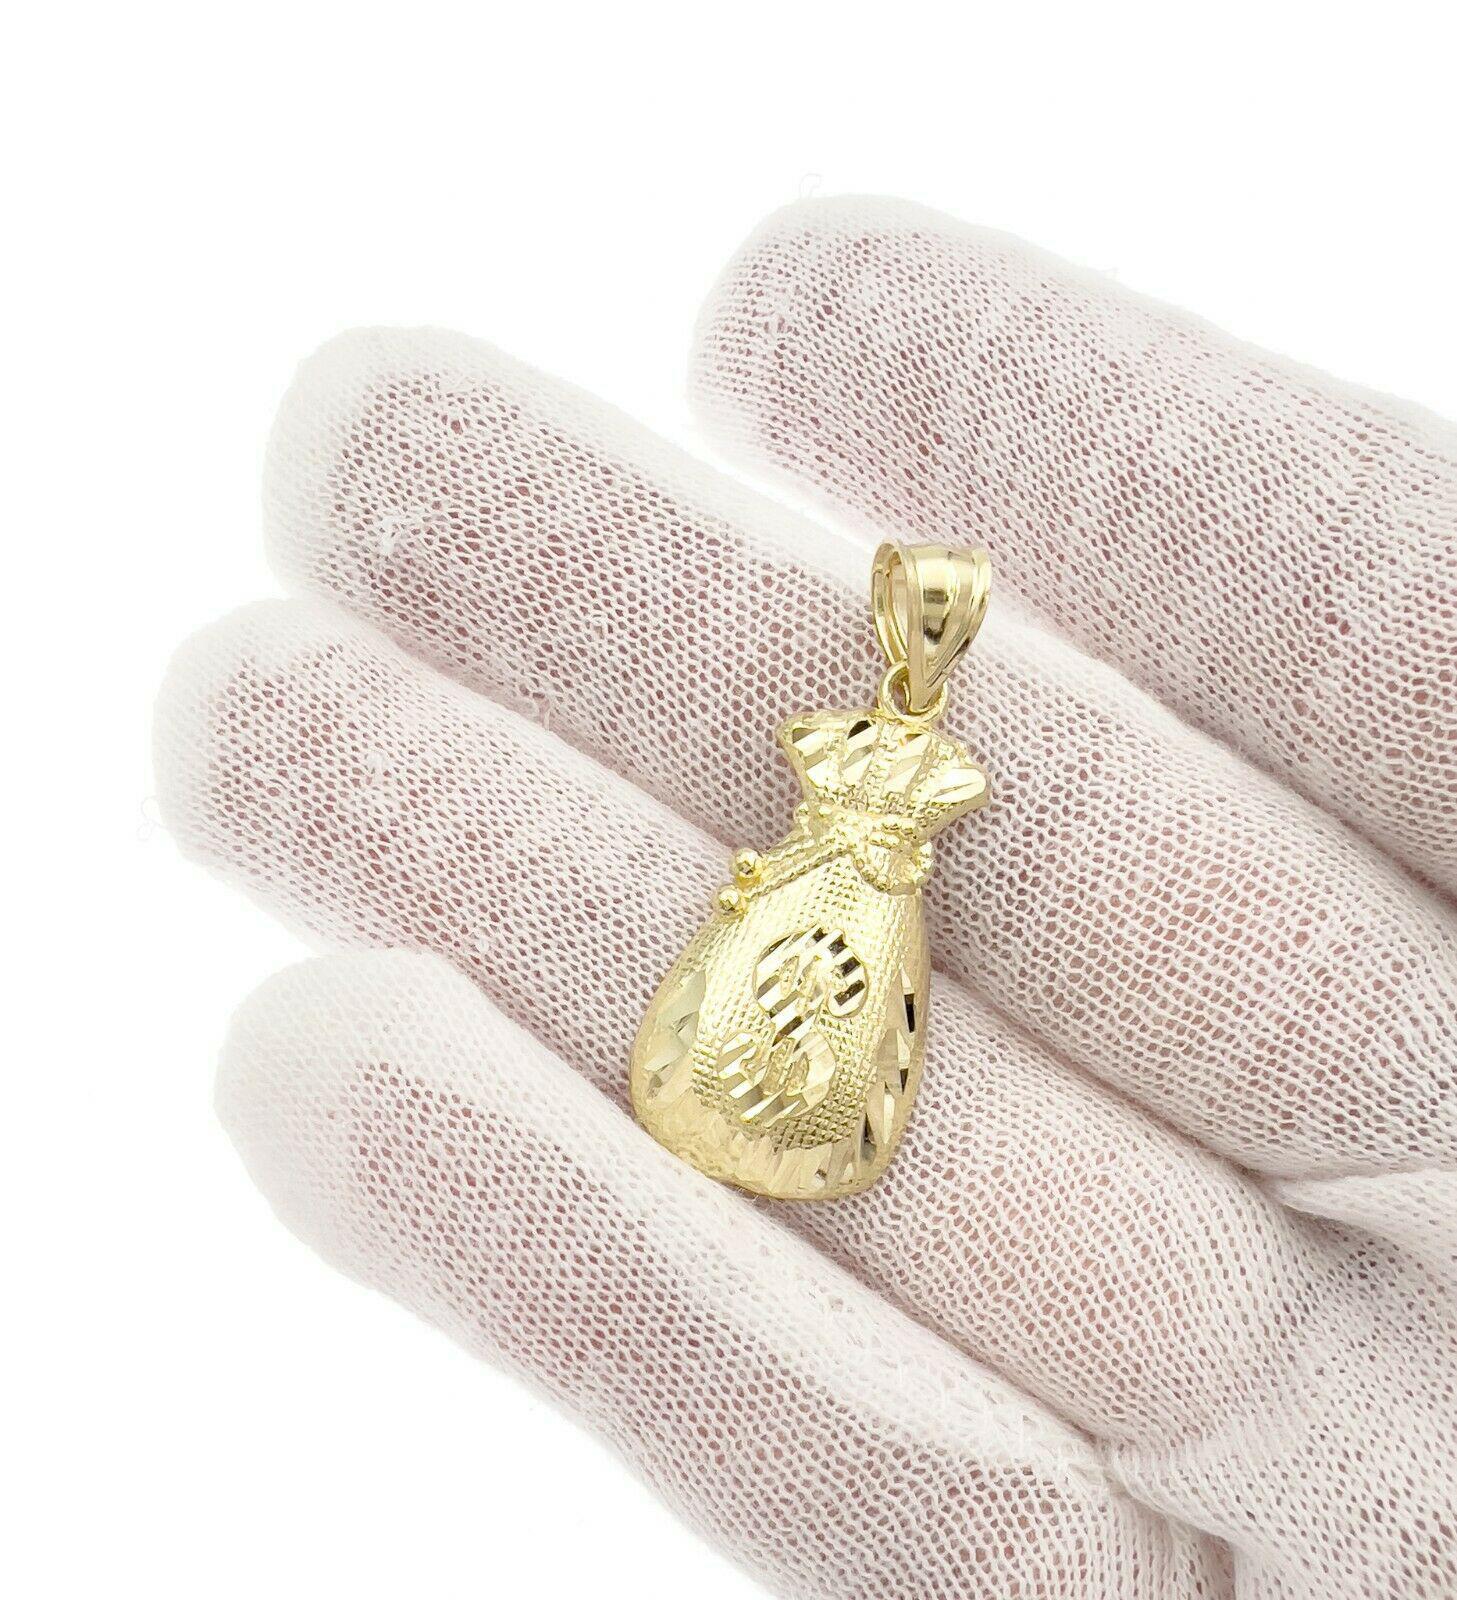 Real 10k Yellow Gold Money Bag Charm 1'' inches Pendant 10kt for Chain